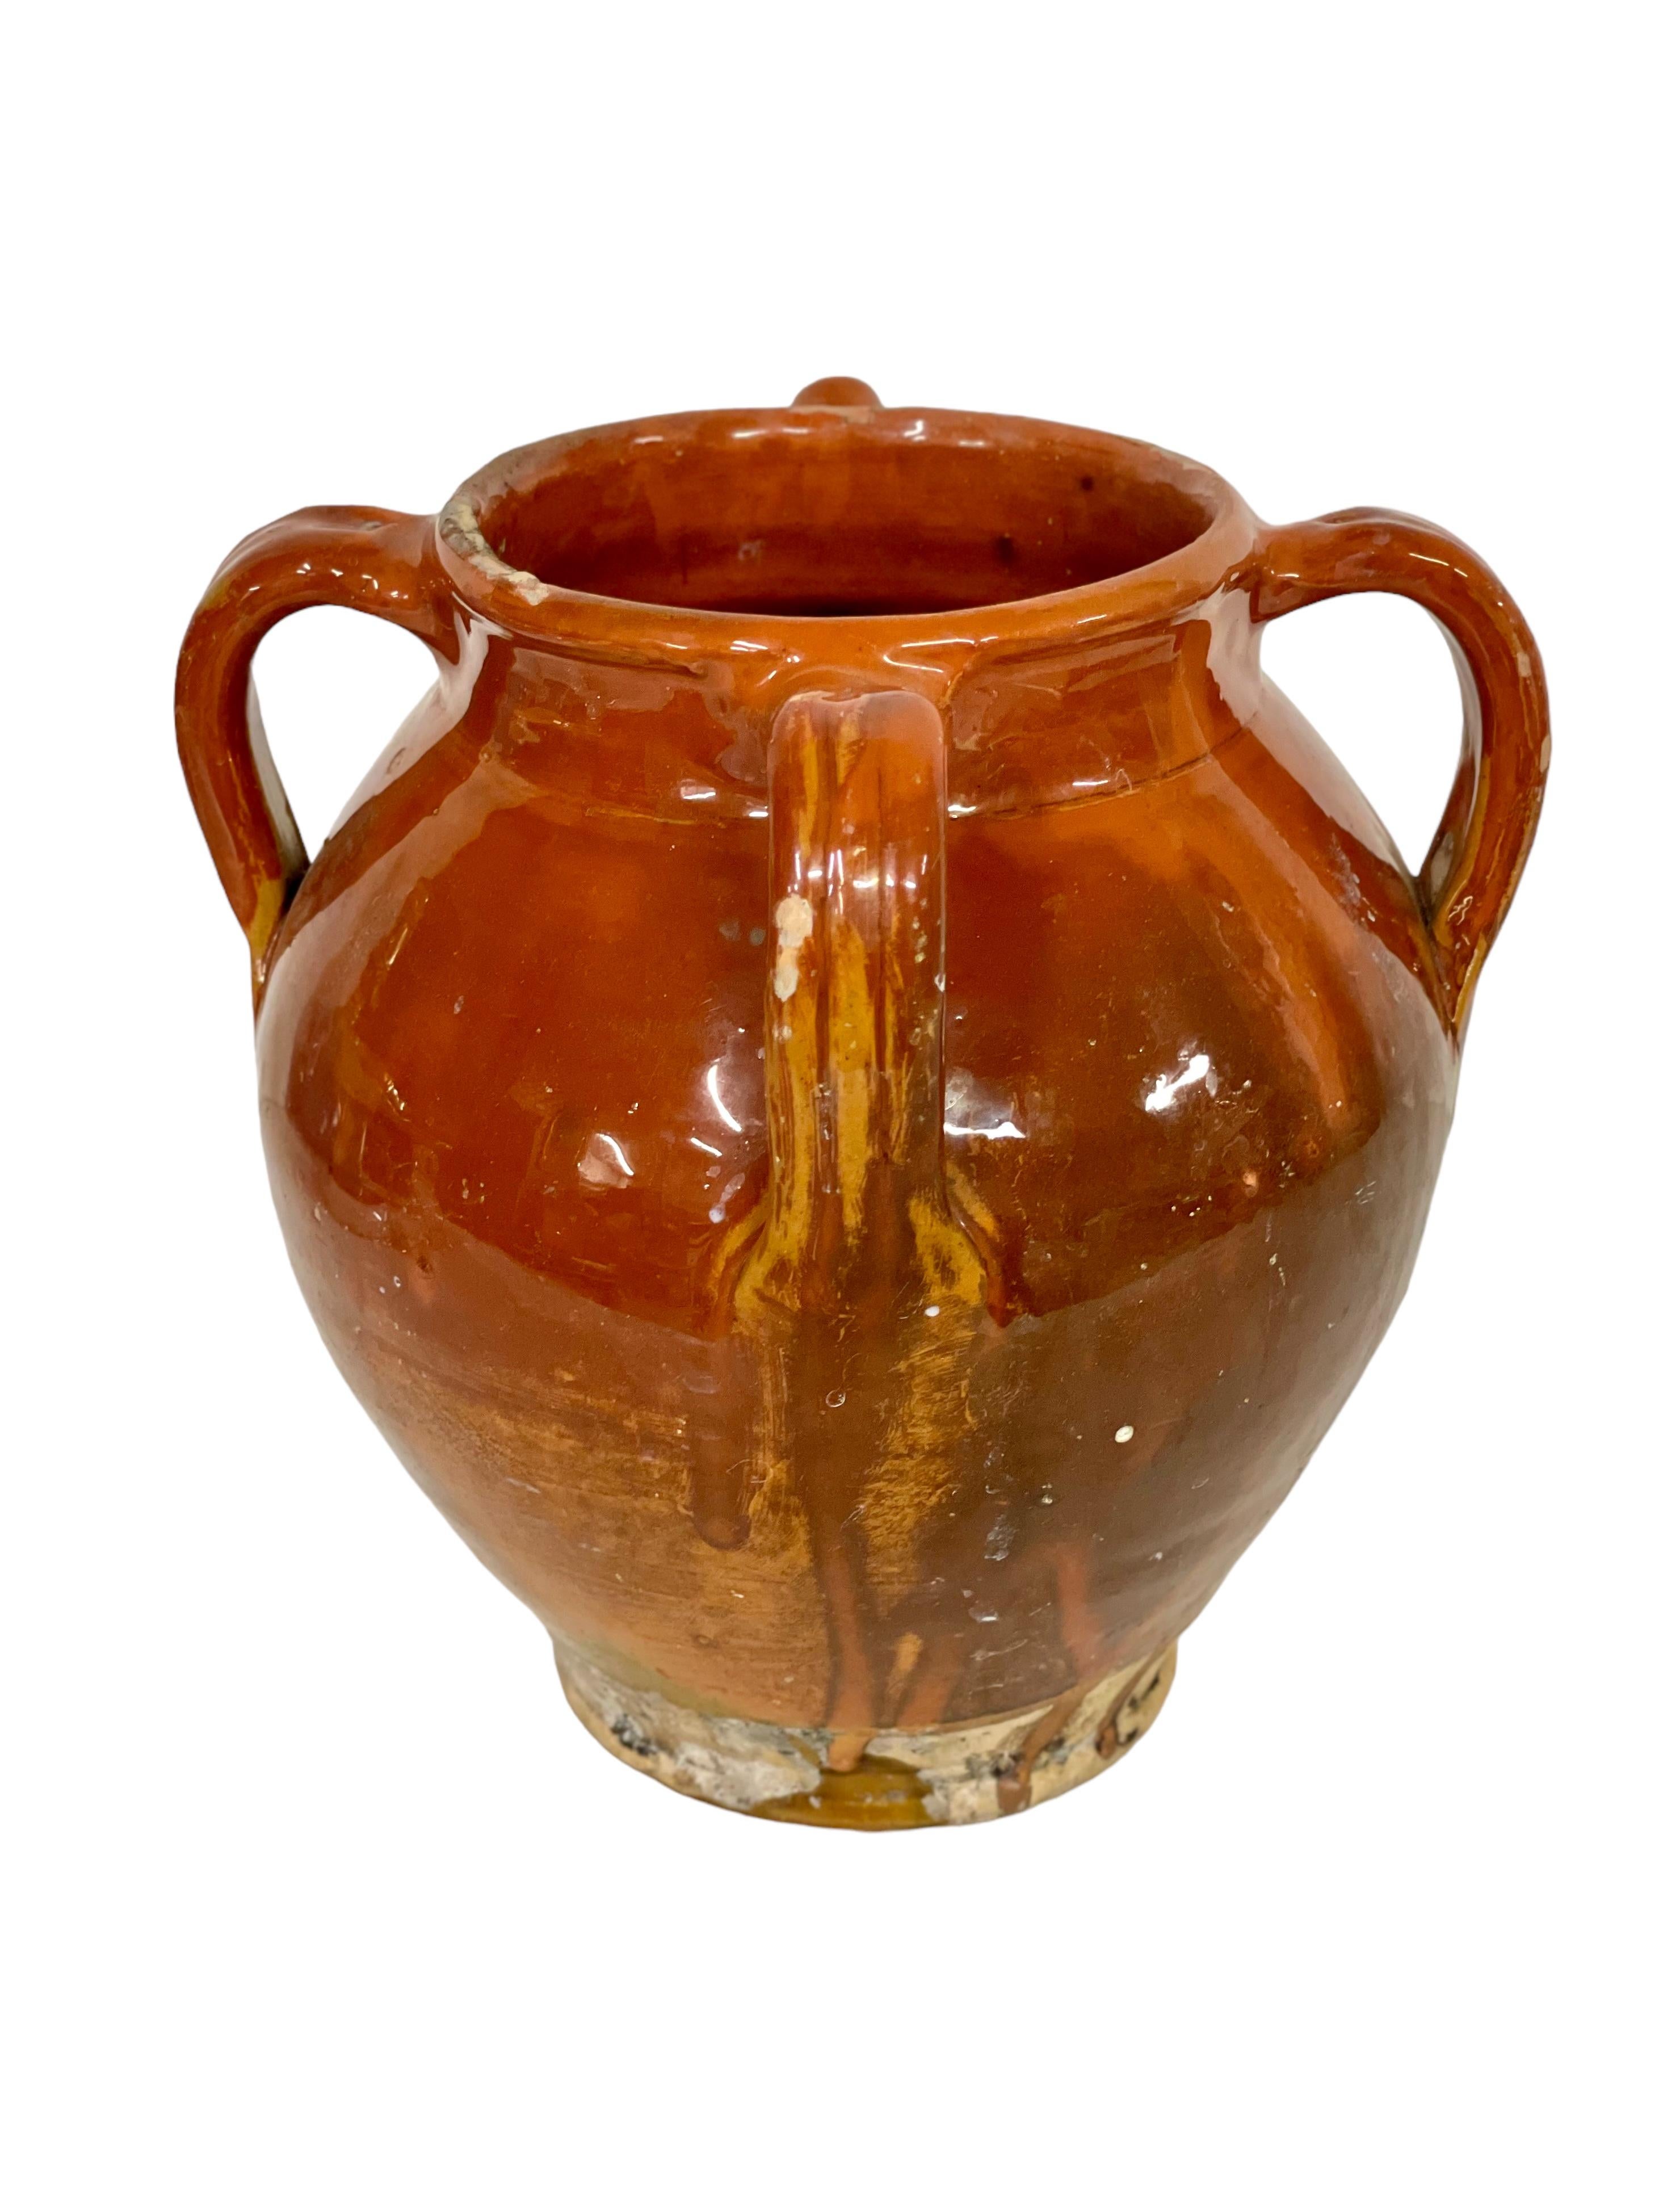 Rustic 19th C. Glazed Pouring Jug from Dordogne Region of France For Sale